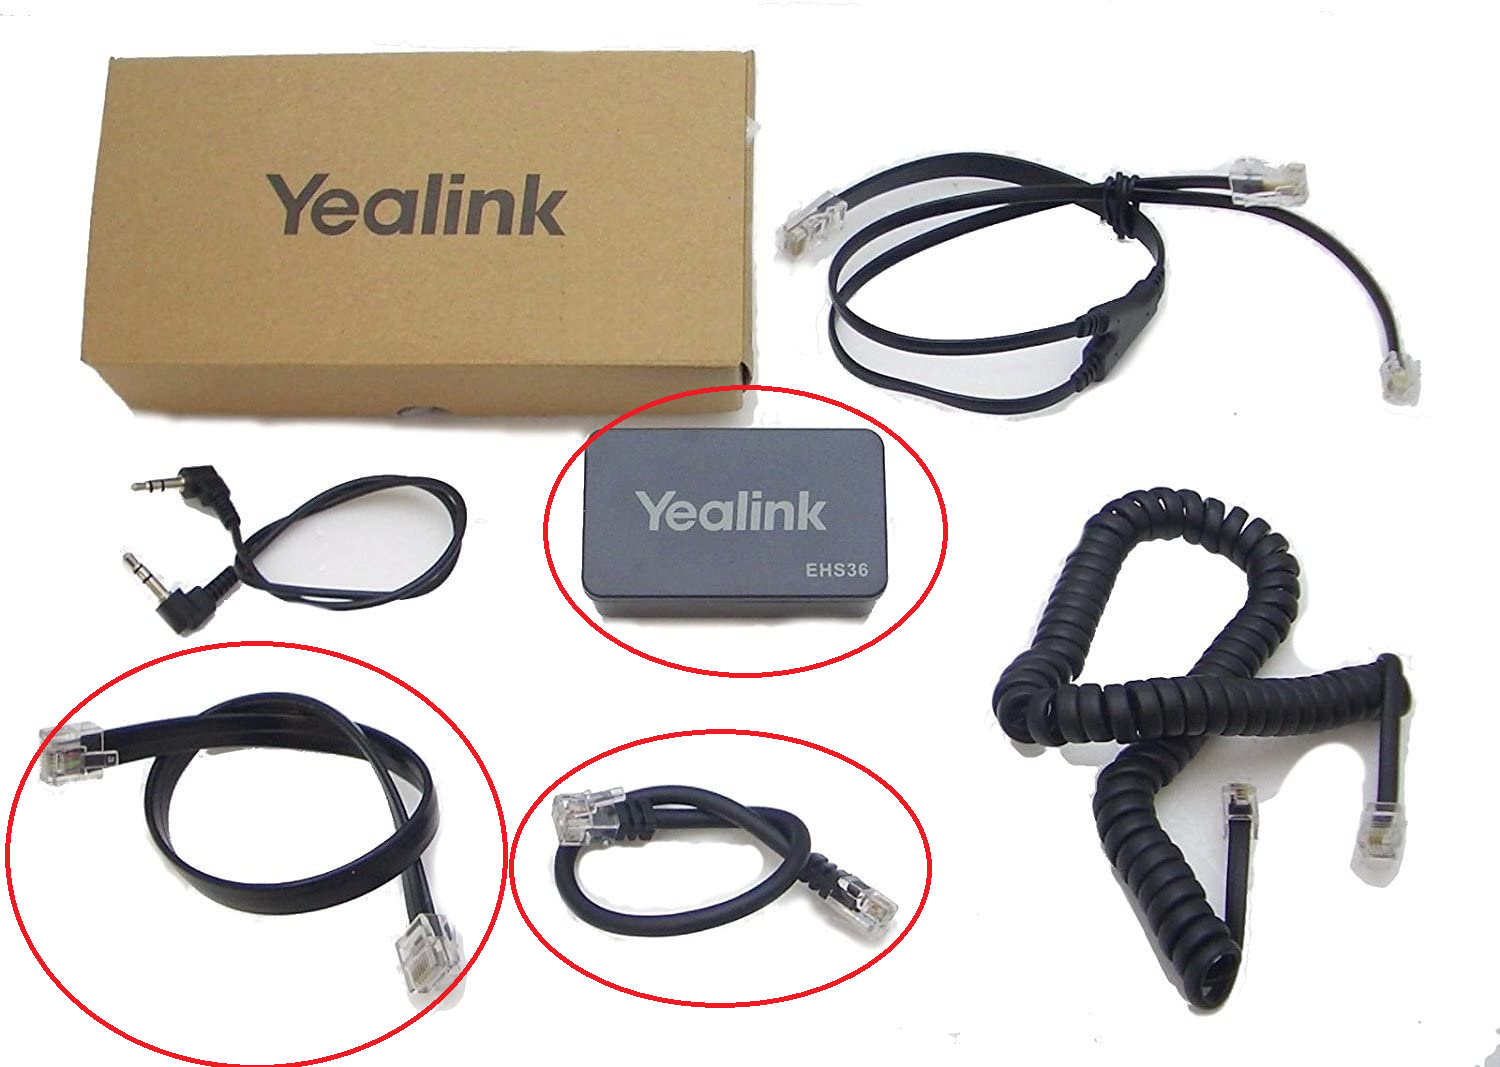 Leitner EHS36 corded needed for setup with Yealink phone